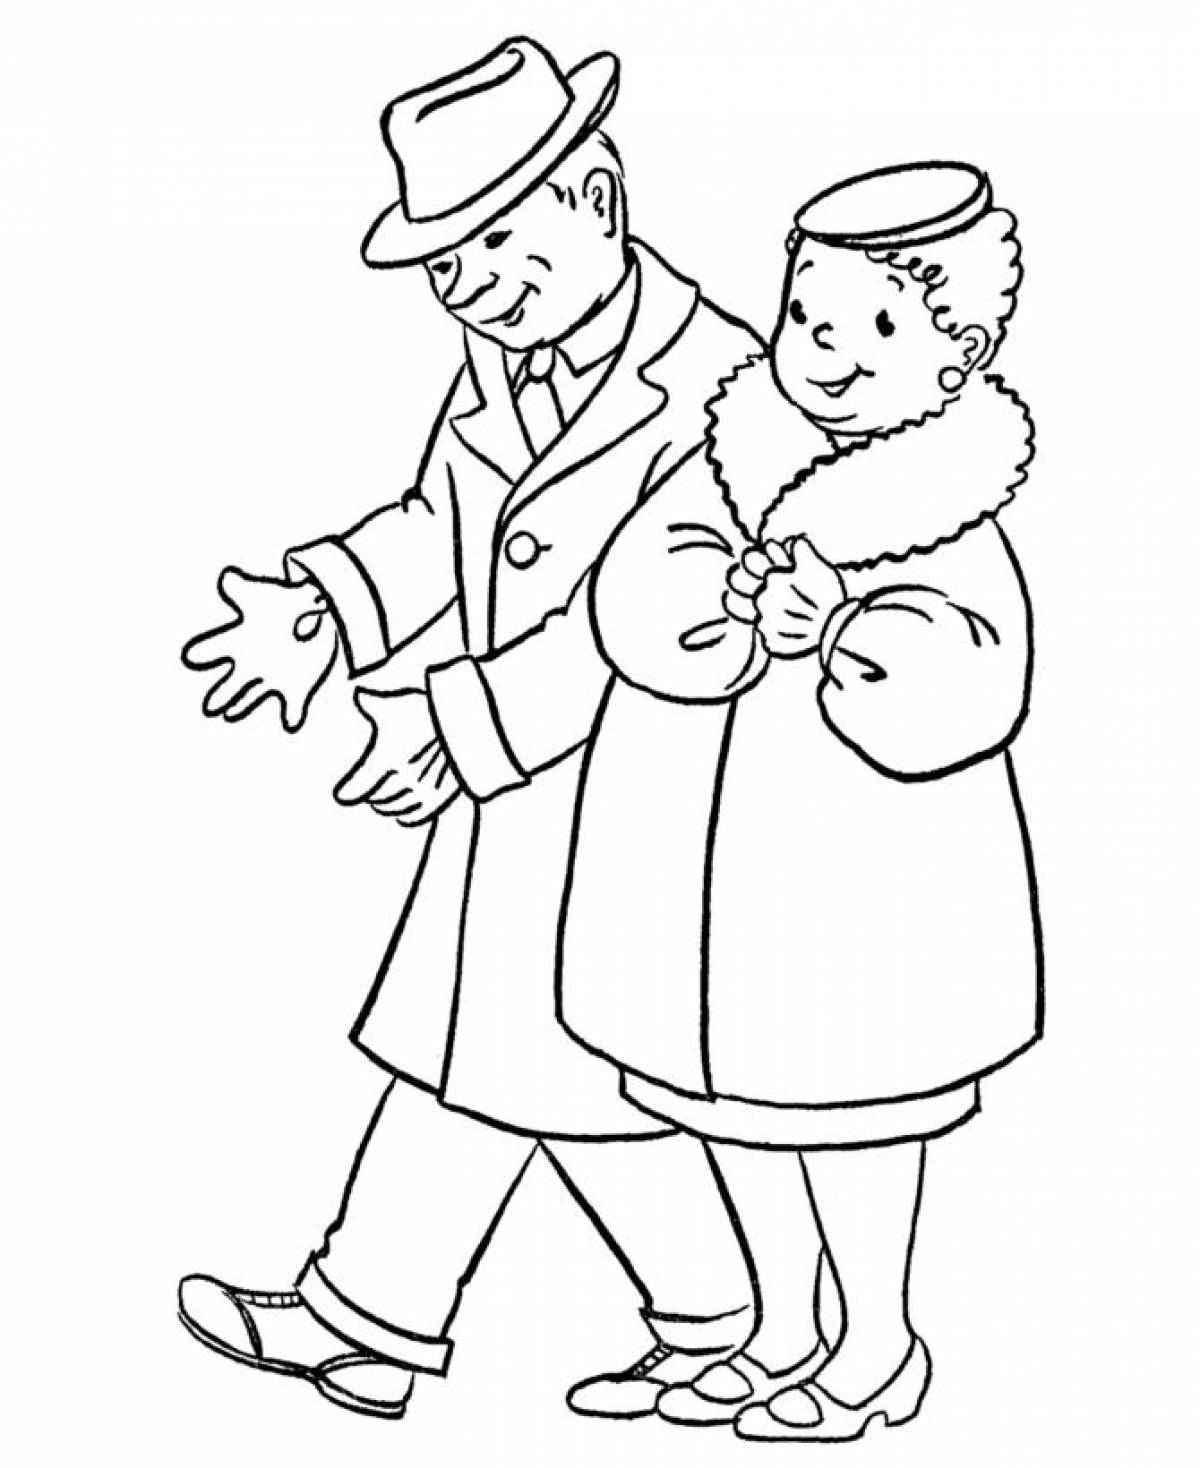 Charming grandfather coloring book